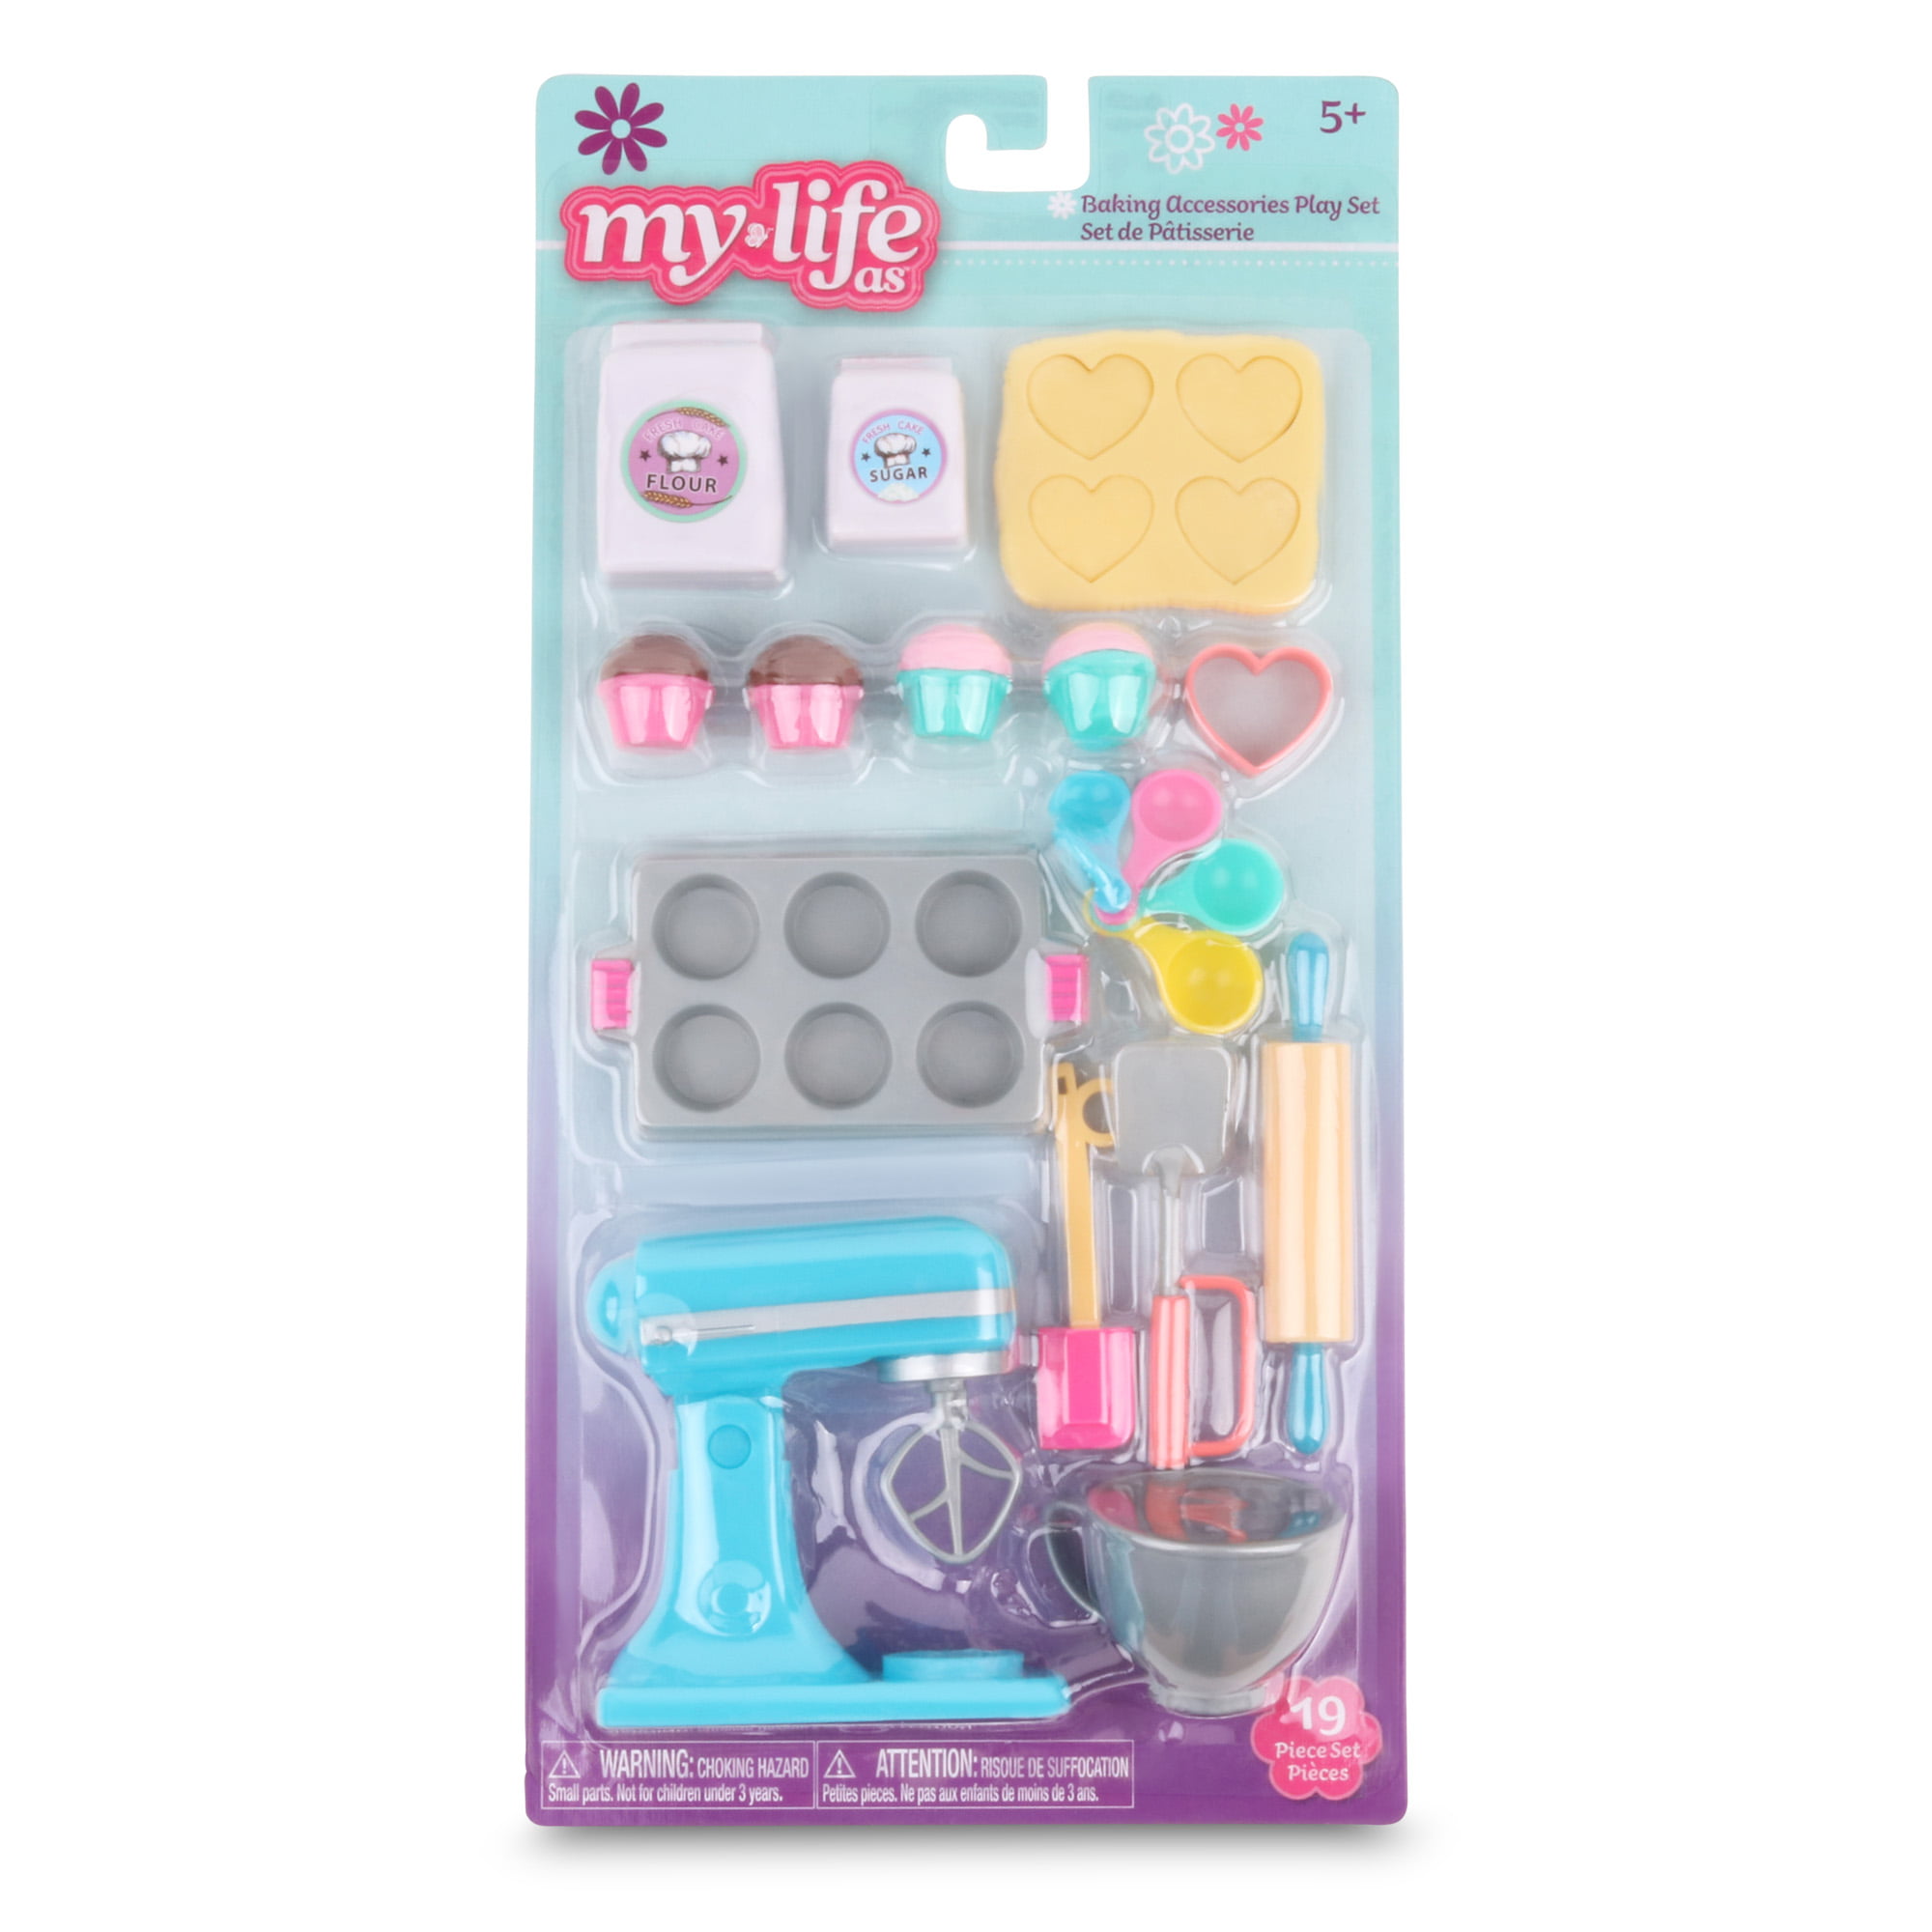 My Life As Baking Accessories Play Set, 20 Pieces